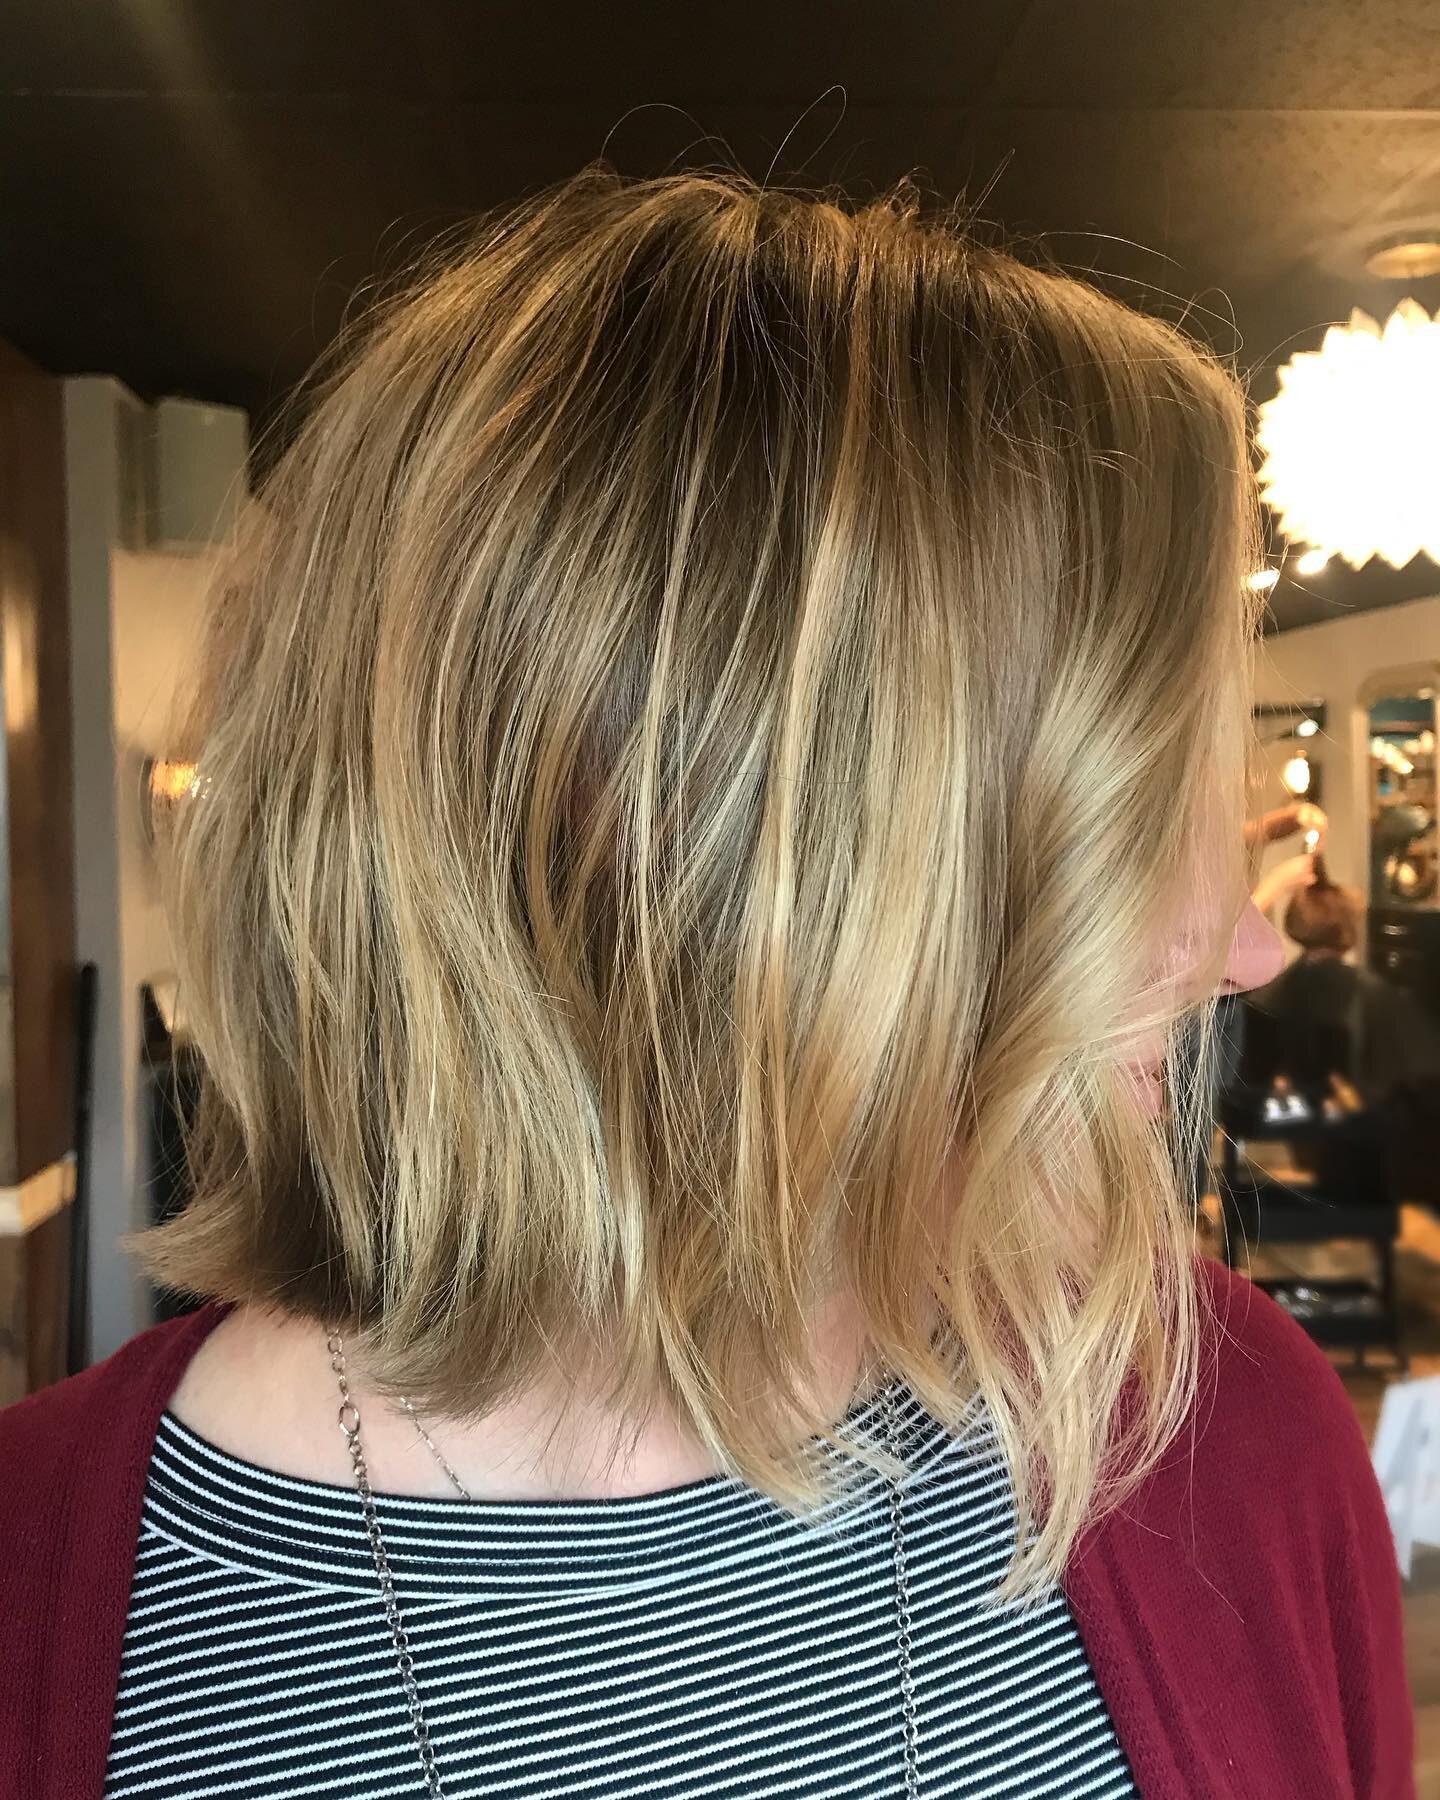 Blonde lightening, cut ant style on this beautiful lady.